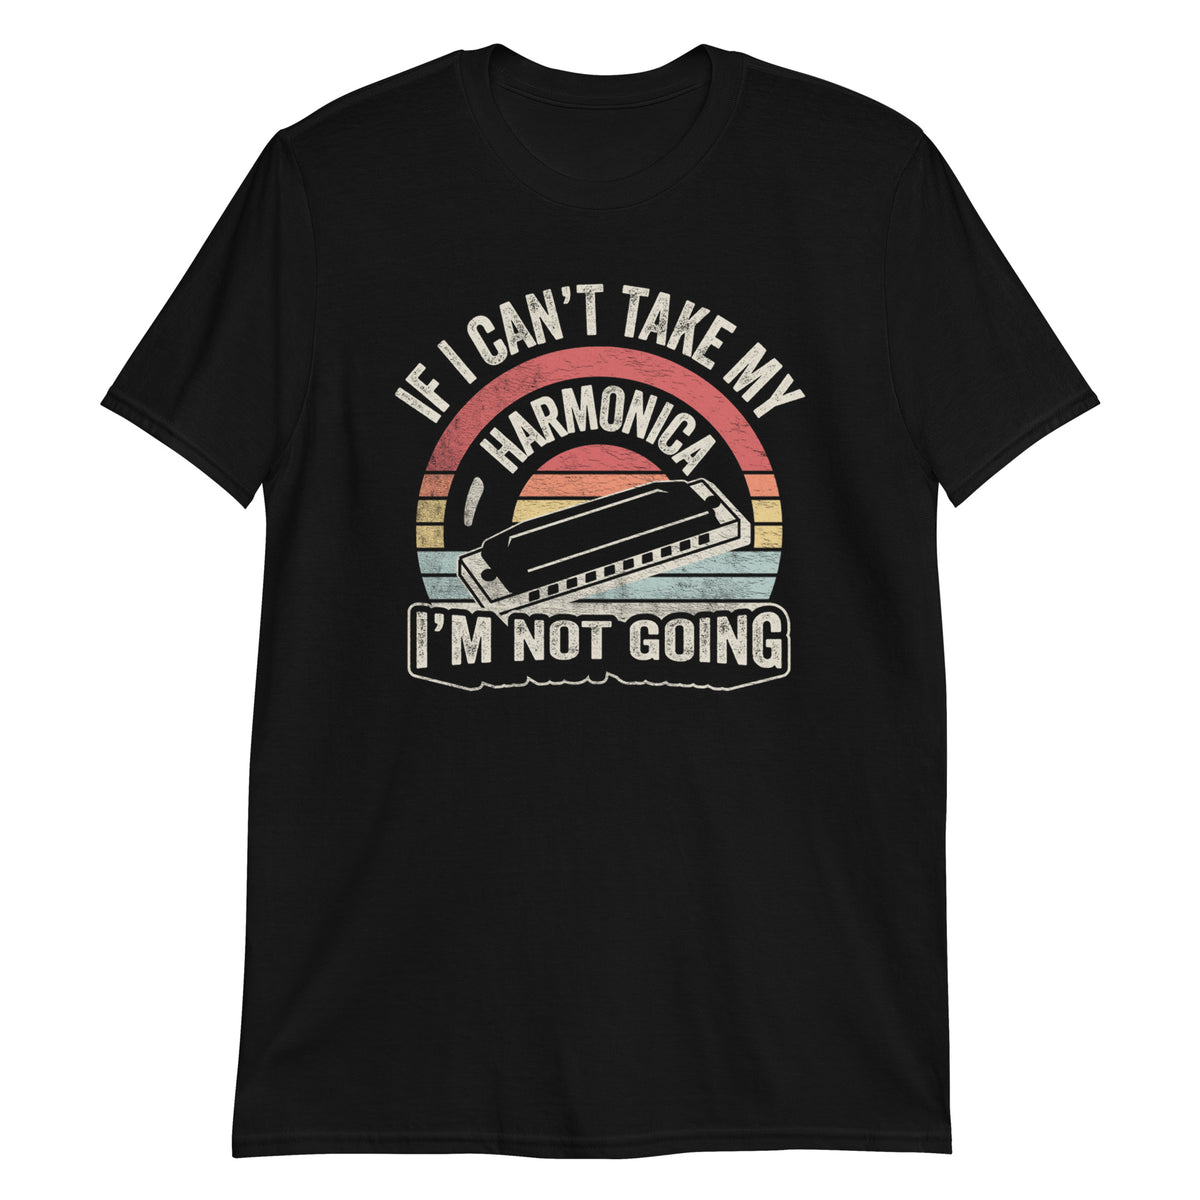 If I Can't Take My Harmonica I'm Not Going T-Shirt